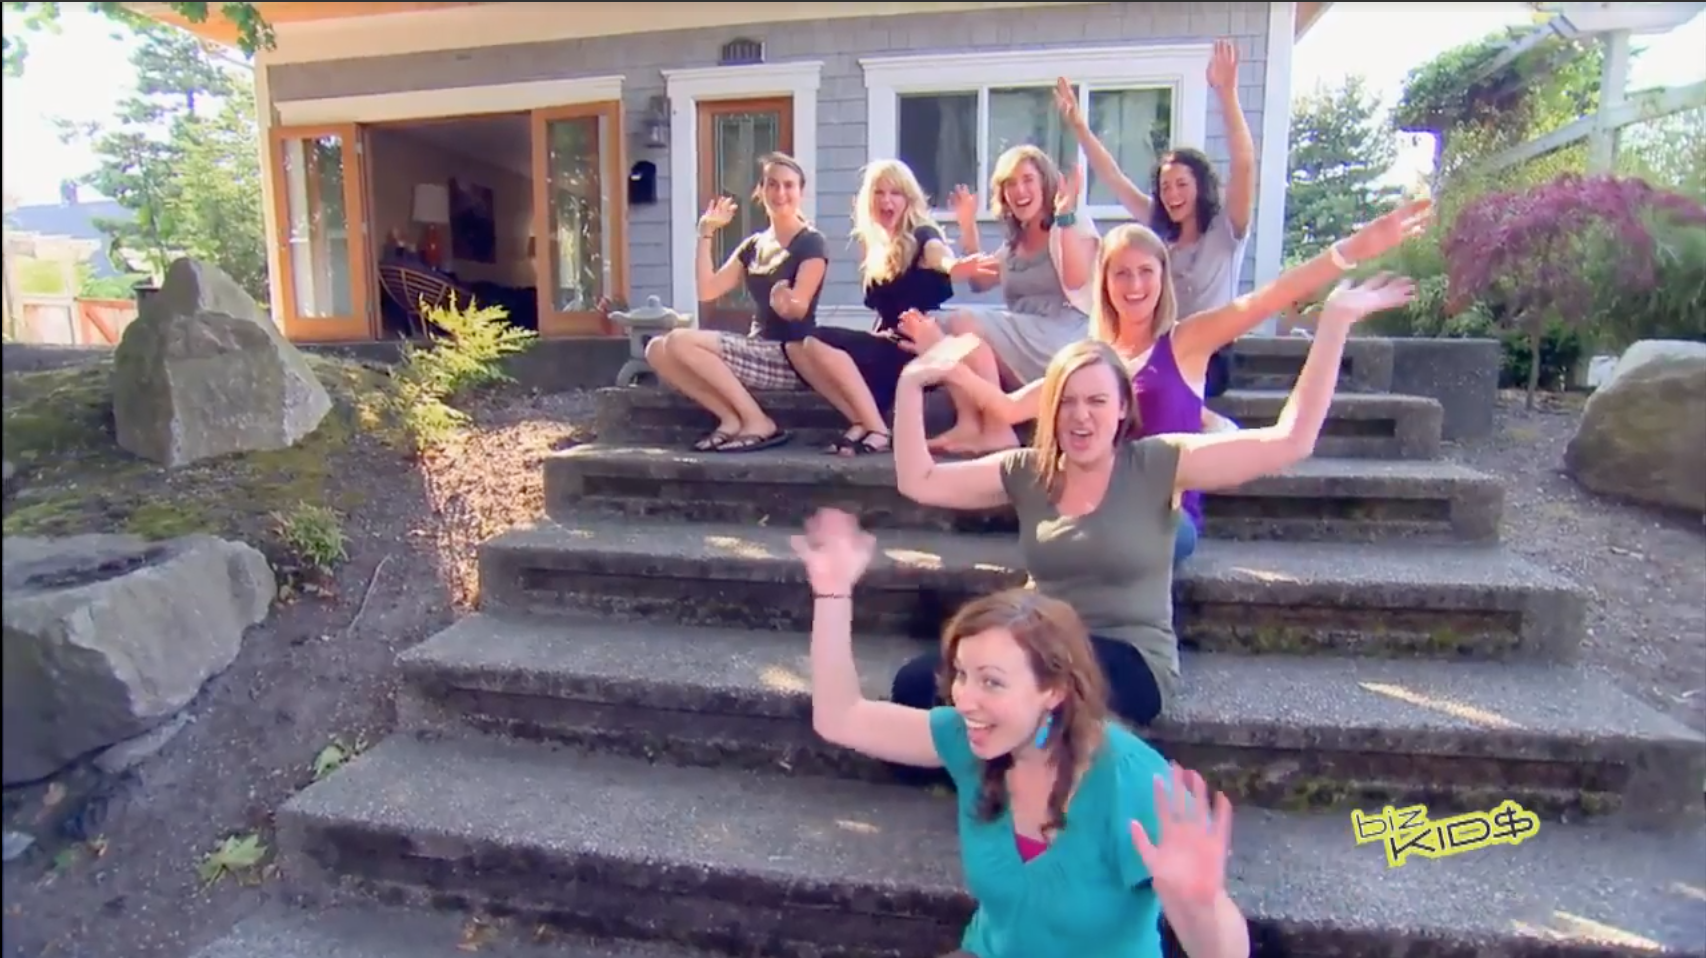 A group of people posing on steps in front of a house.